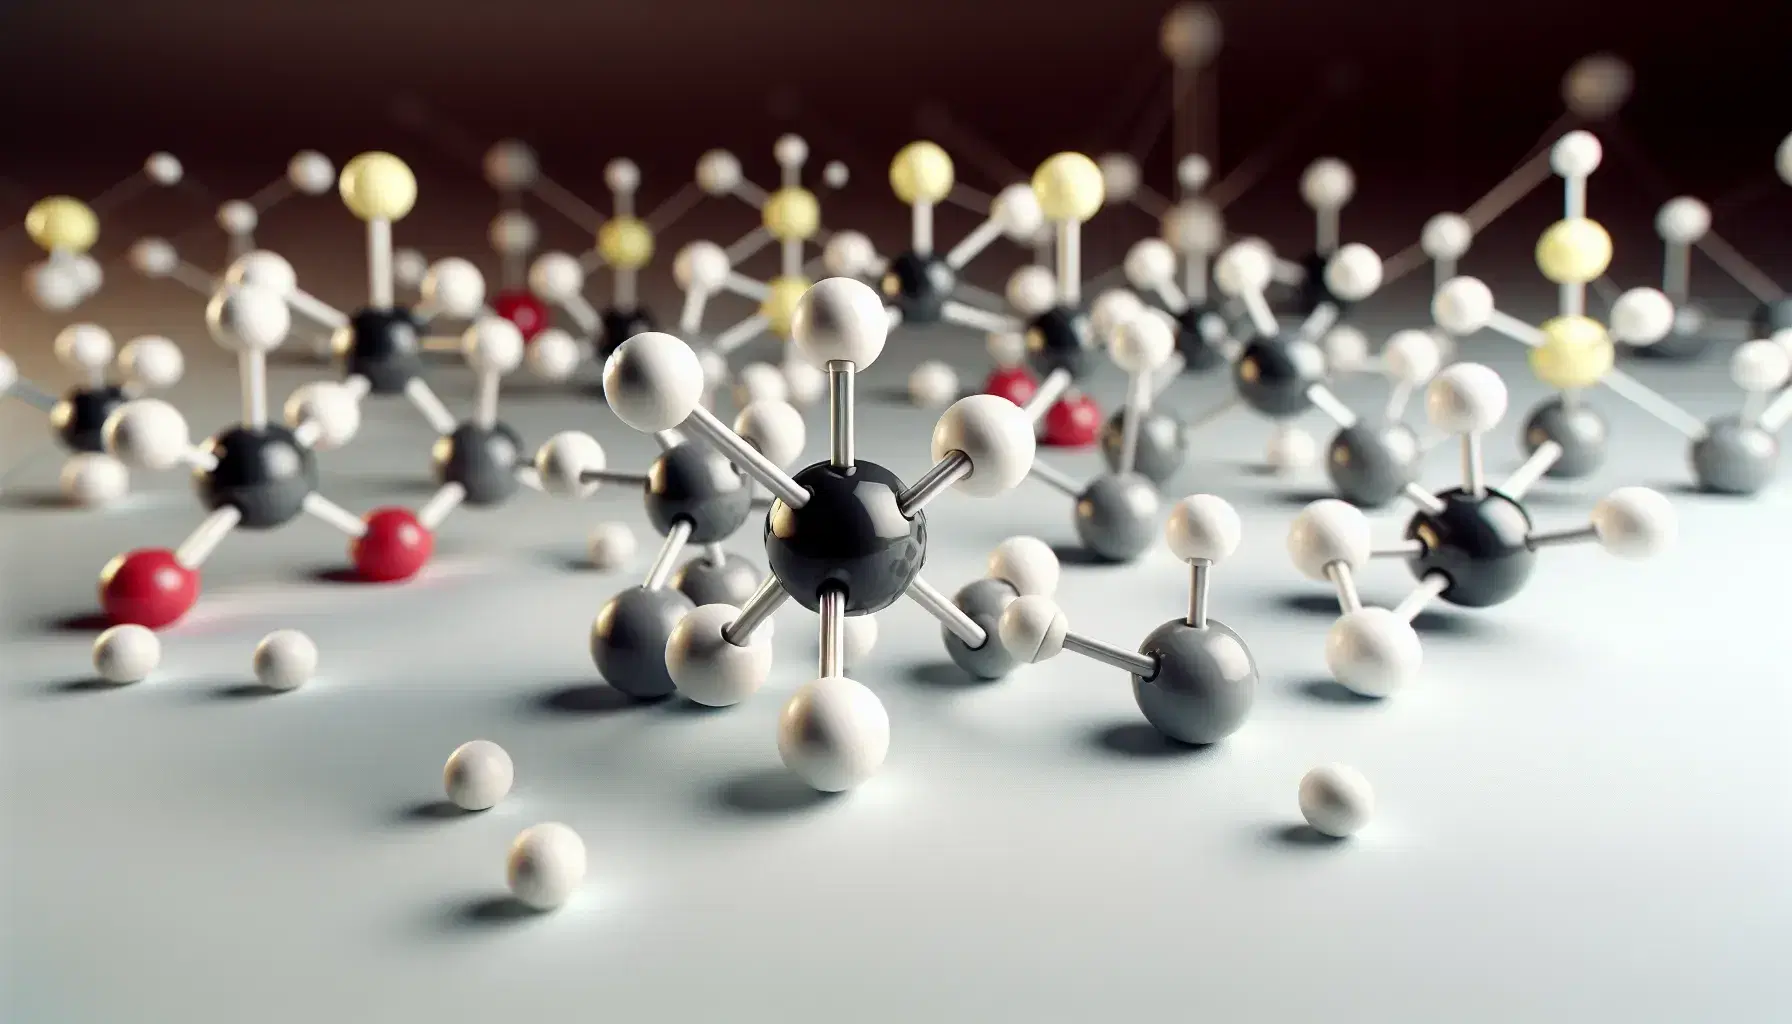 Three-dimensional molecular models with methane CH4 in the center, water H2O on the left and sulfur hexafluoride SF6 on the right on a light background.